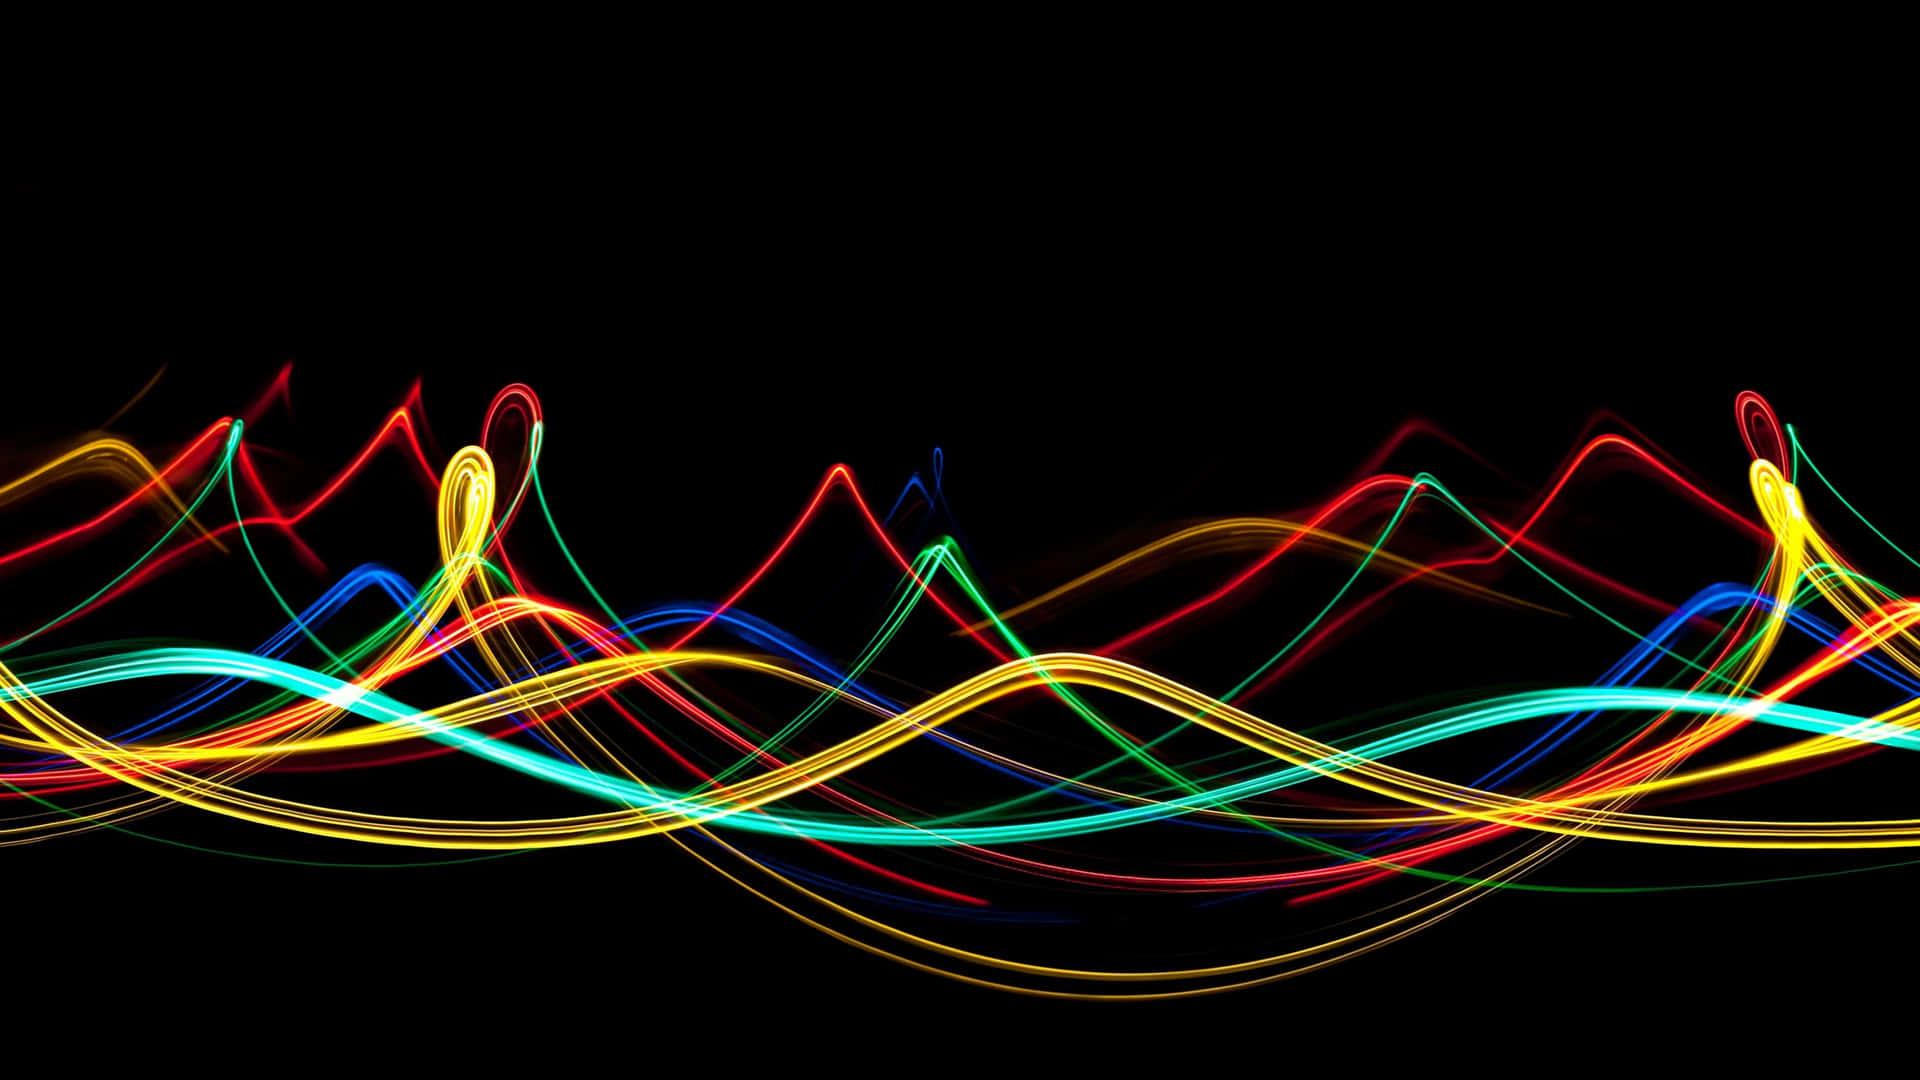 A Colorful Wave Of Light On A Black Background Wallpaper